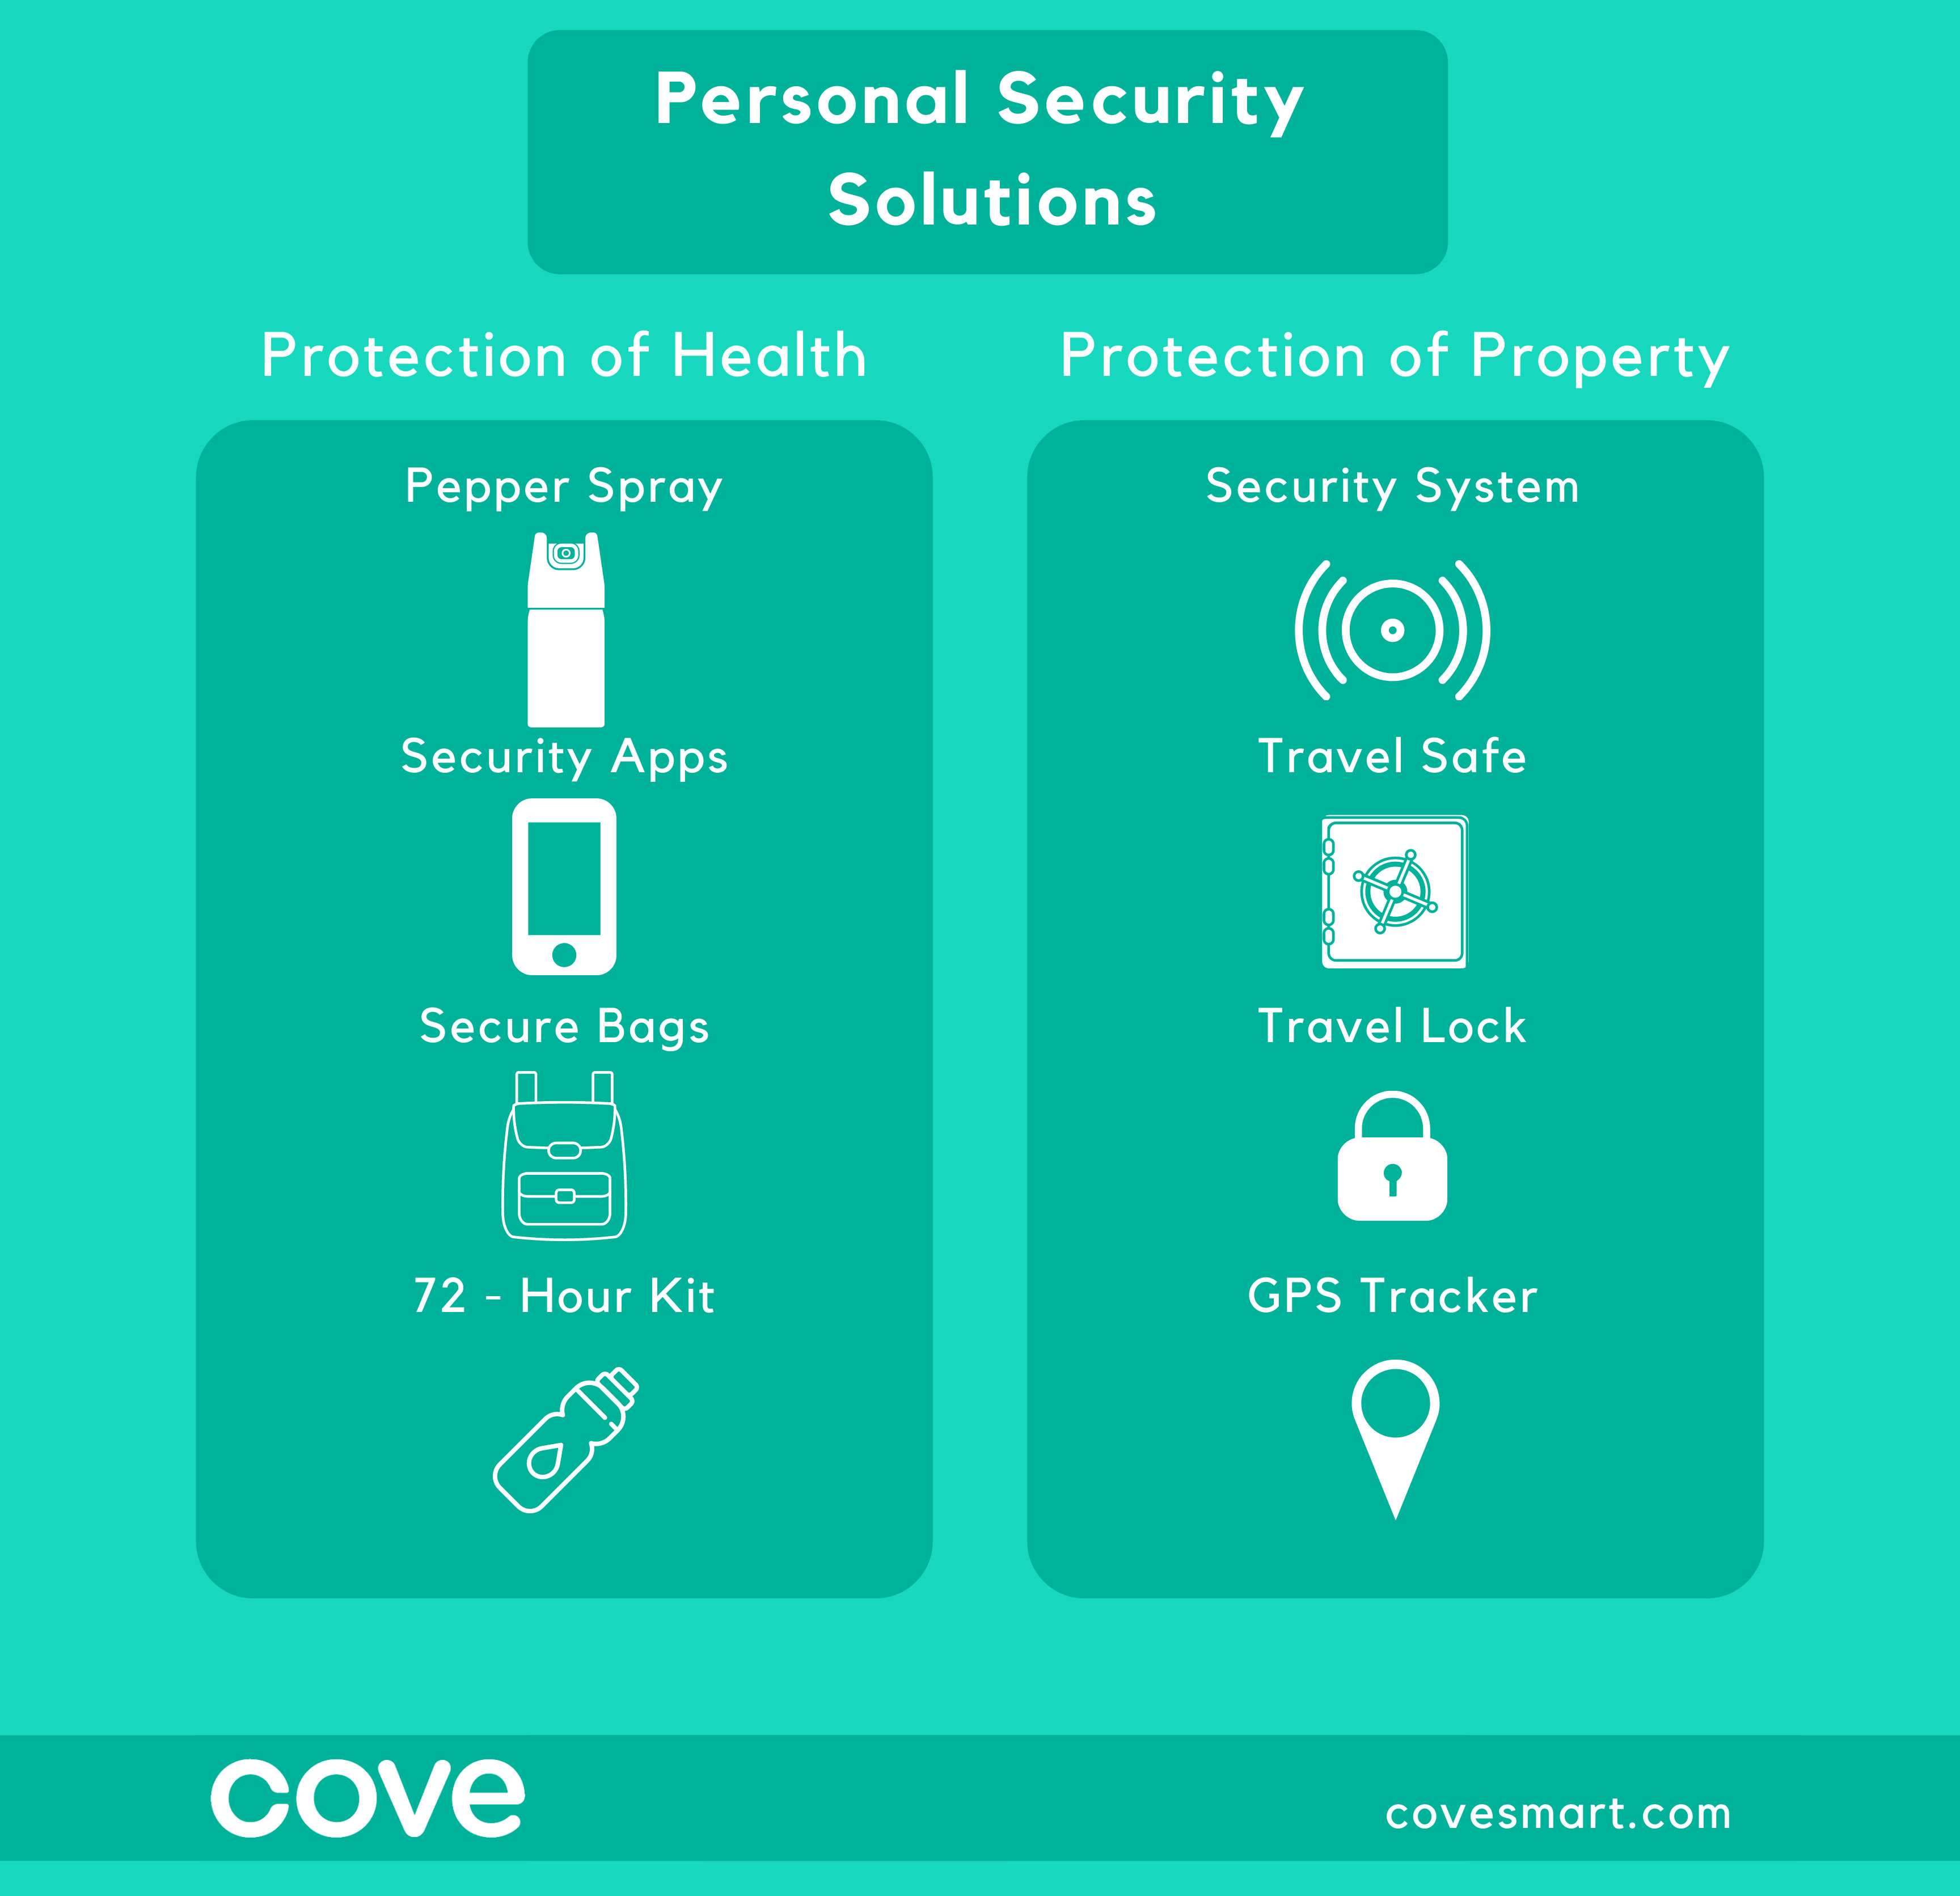 An infographic showing personal security solutions for protection of health and property